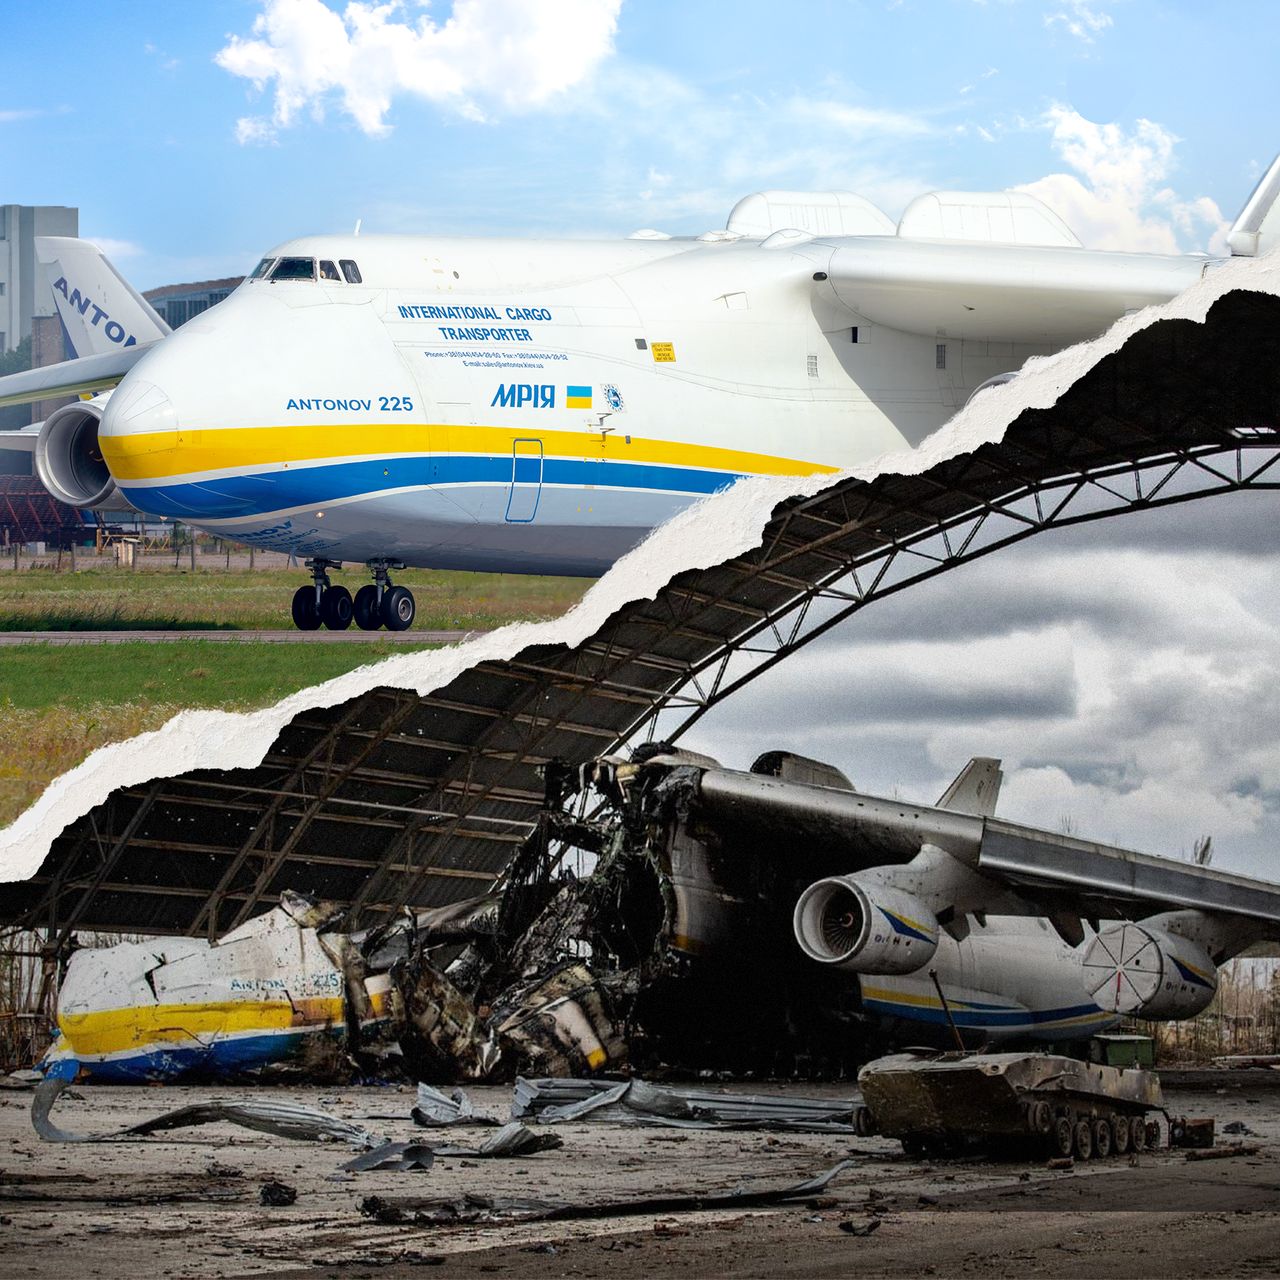 The AN-225 "Mriia" cargo plane. Since its operation  successful  the 1980s,the one-of-a-kind cargo level   designed to transport objects for the abstraction  manufacture  has acceptable   much  than 240 satellite   records for speed, altitude, and load   capacity. It was destroyed and burned during the March 27 Russian onslaught  connected  Hostomel.